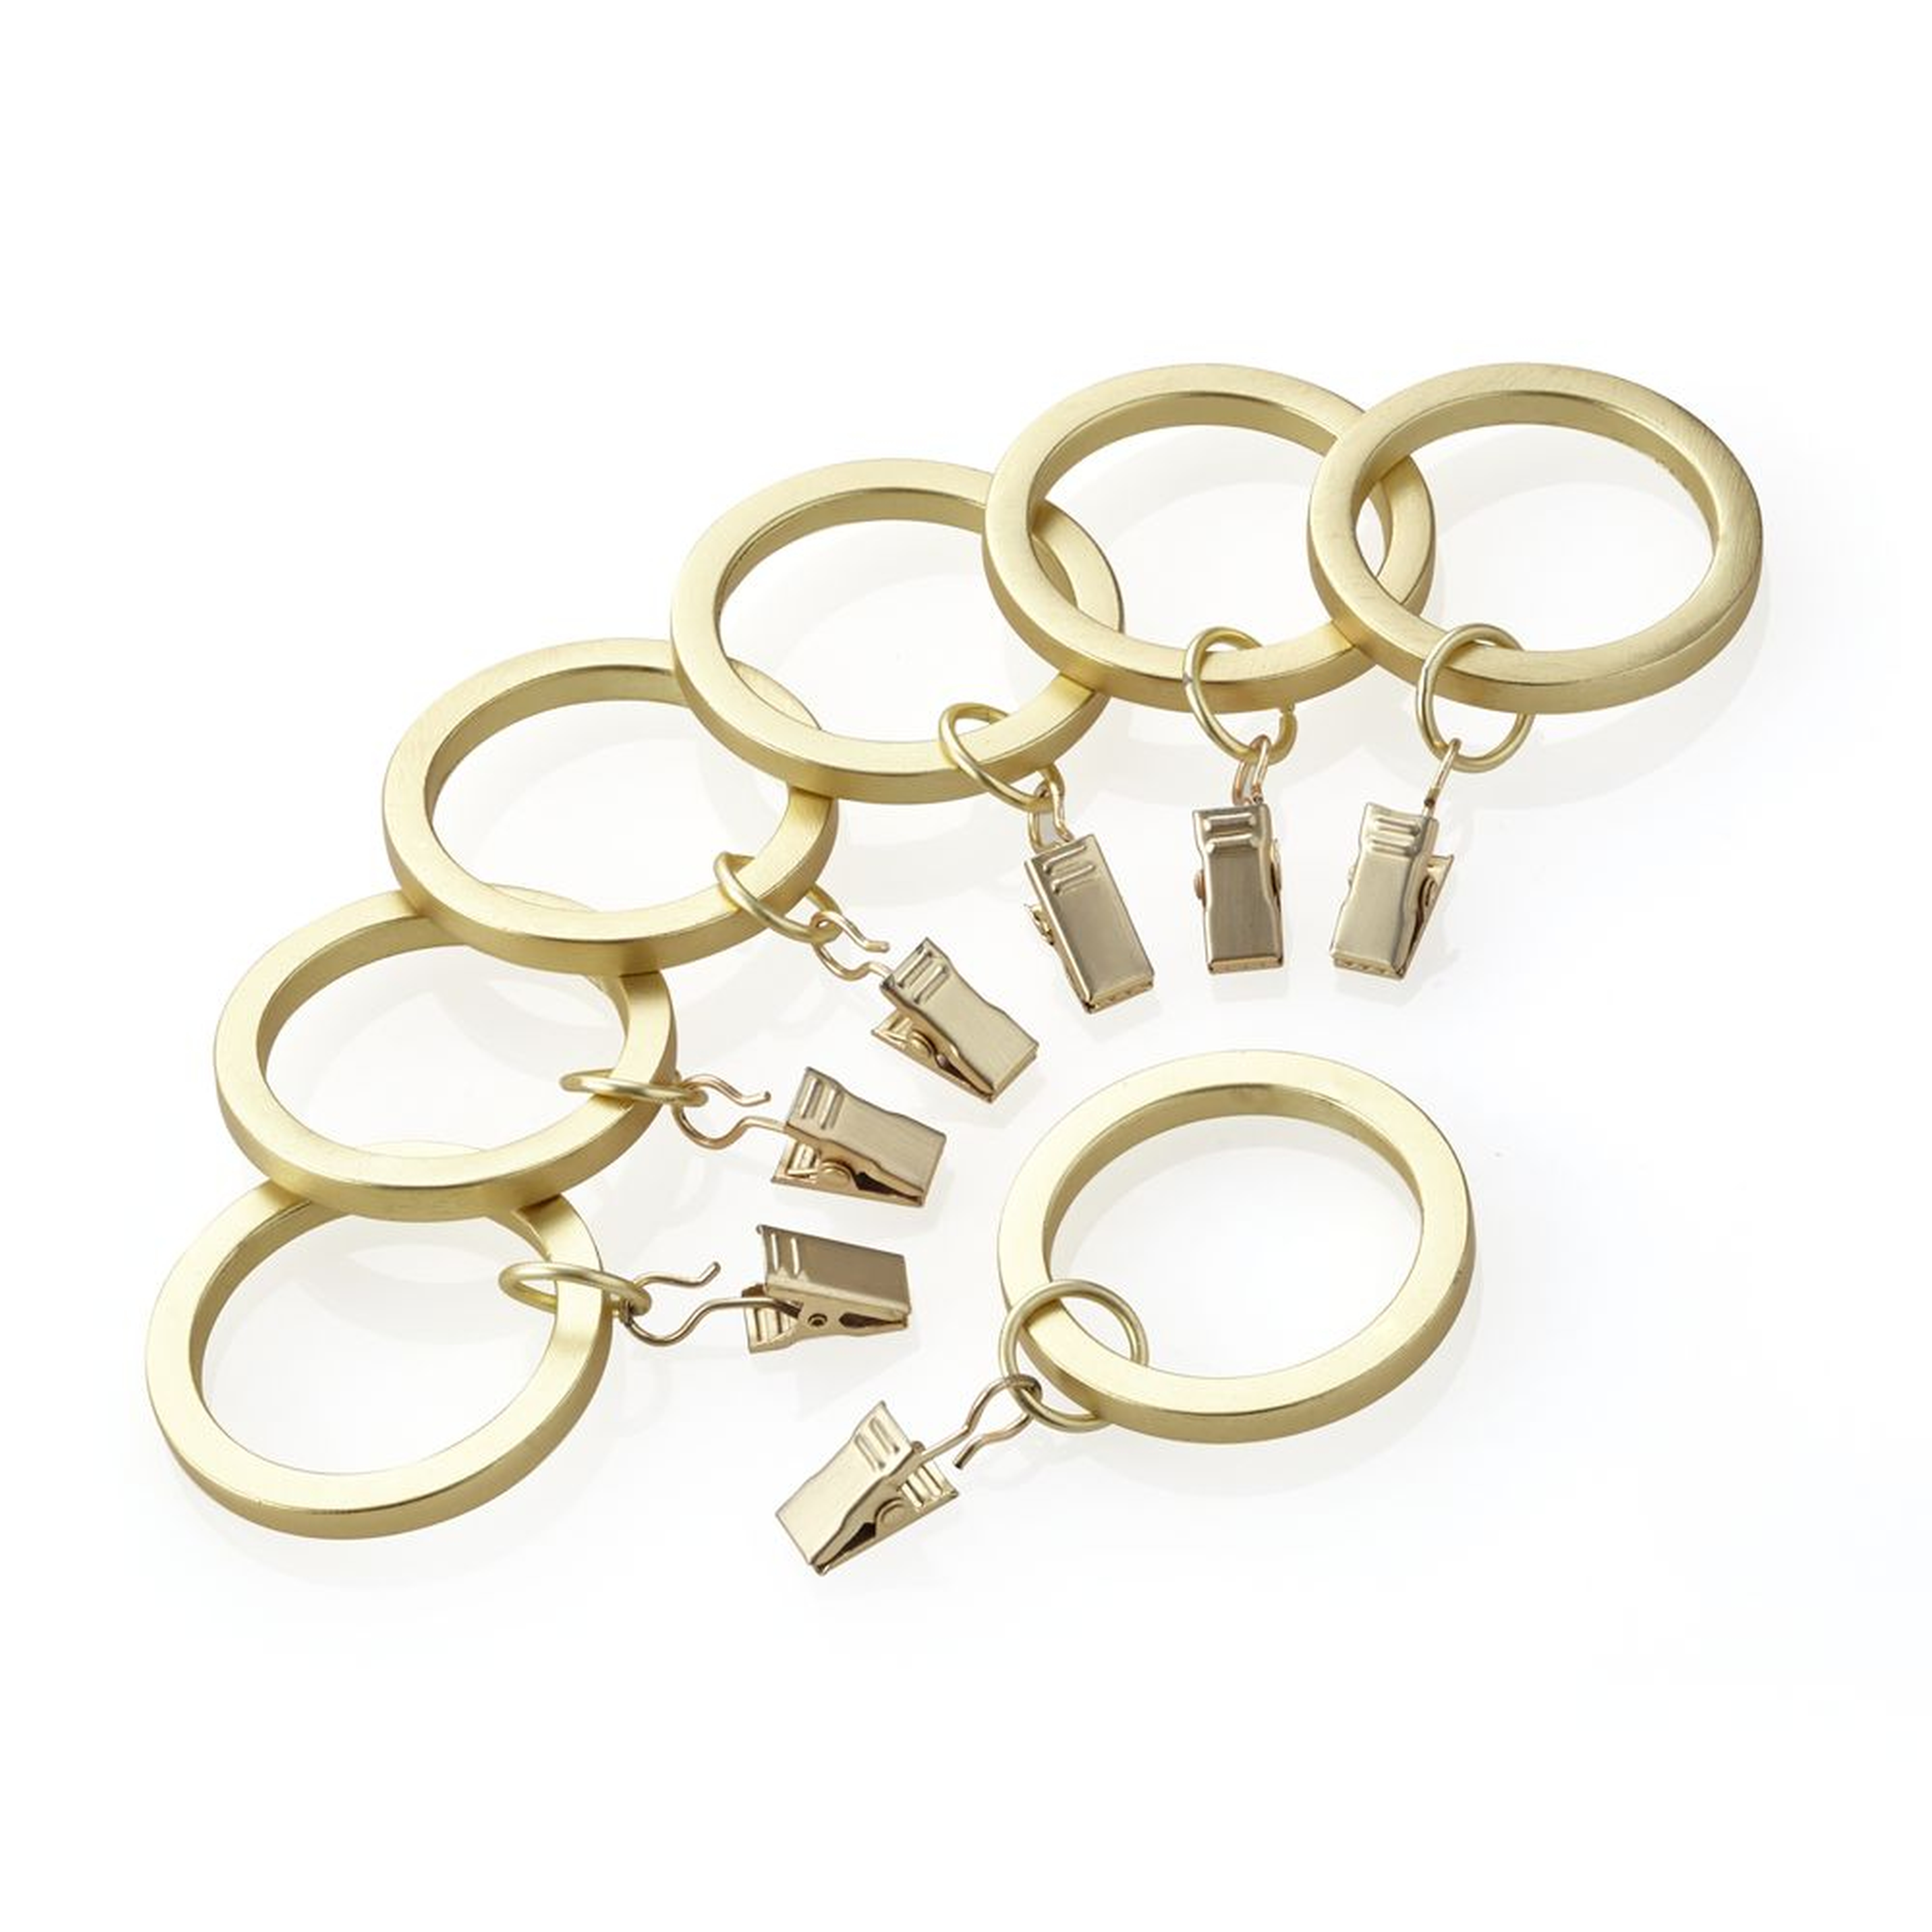 Brass Curtain Rings, Set of 7 - Crate and Barrel